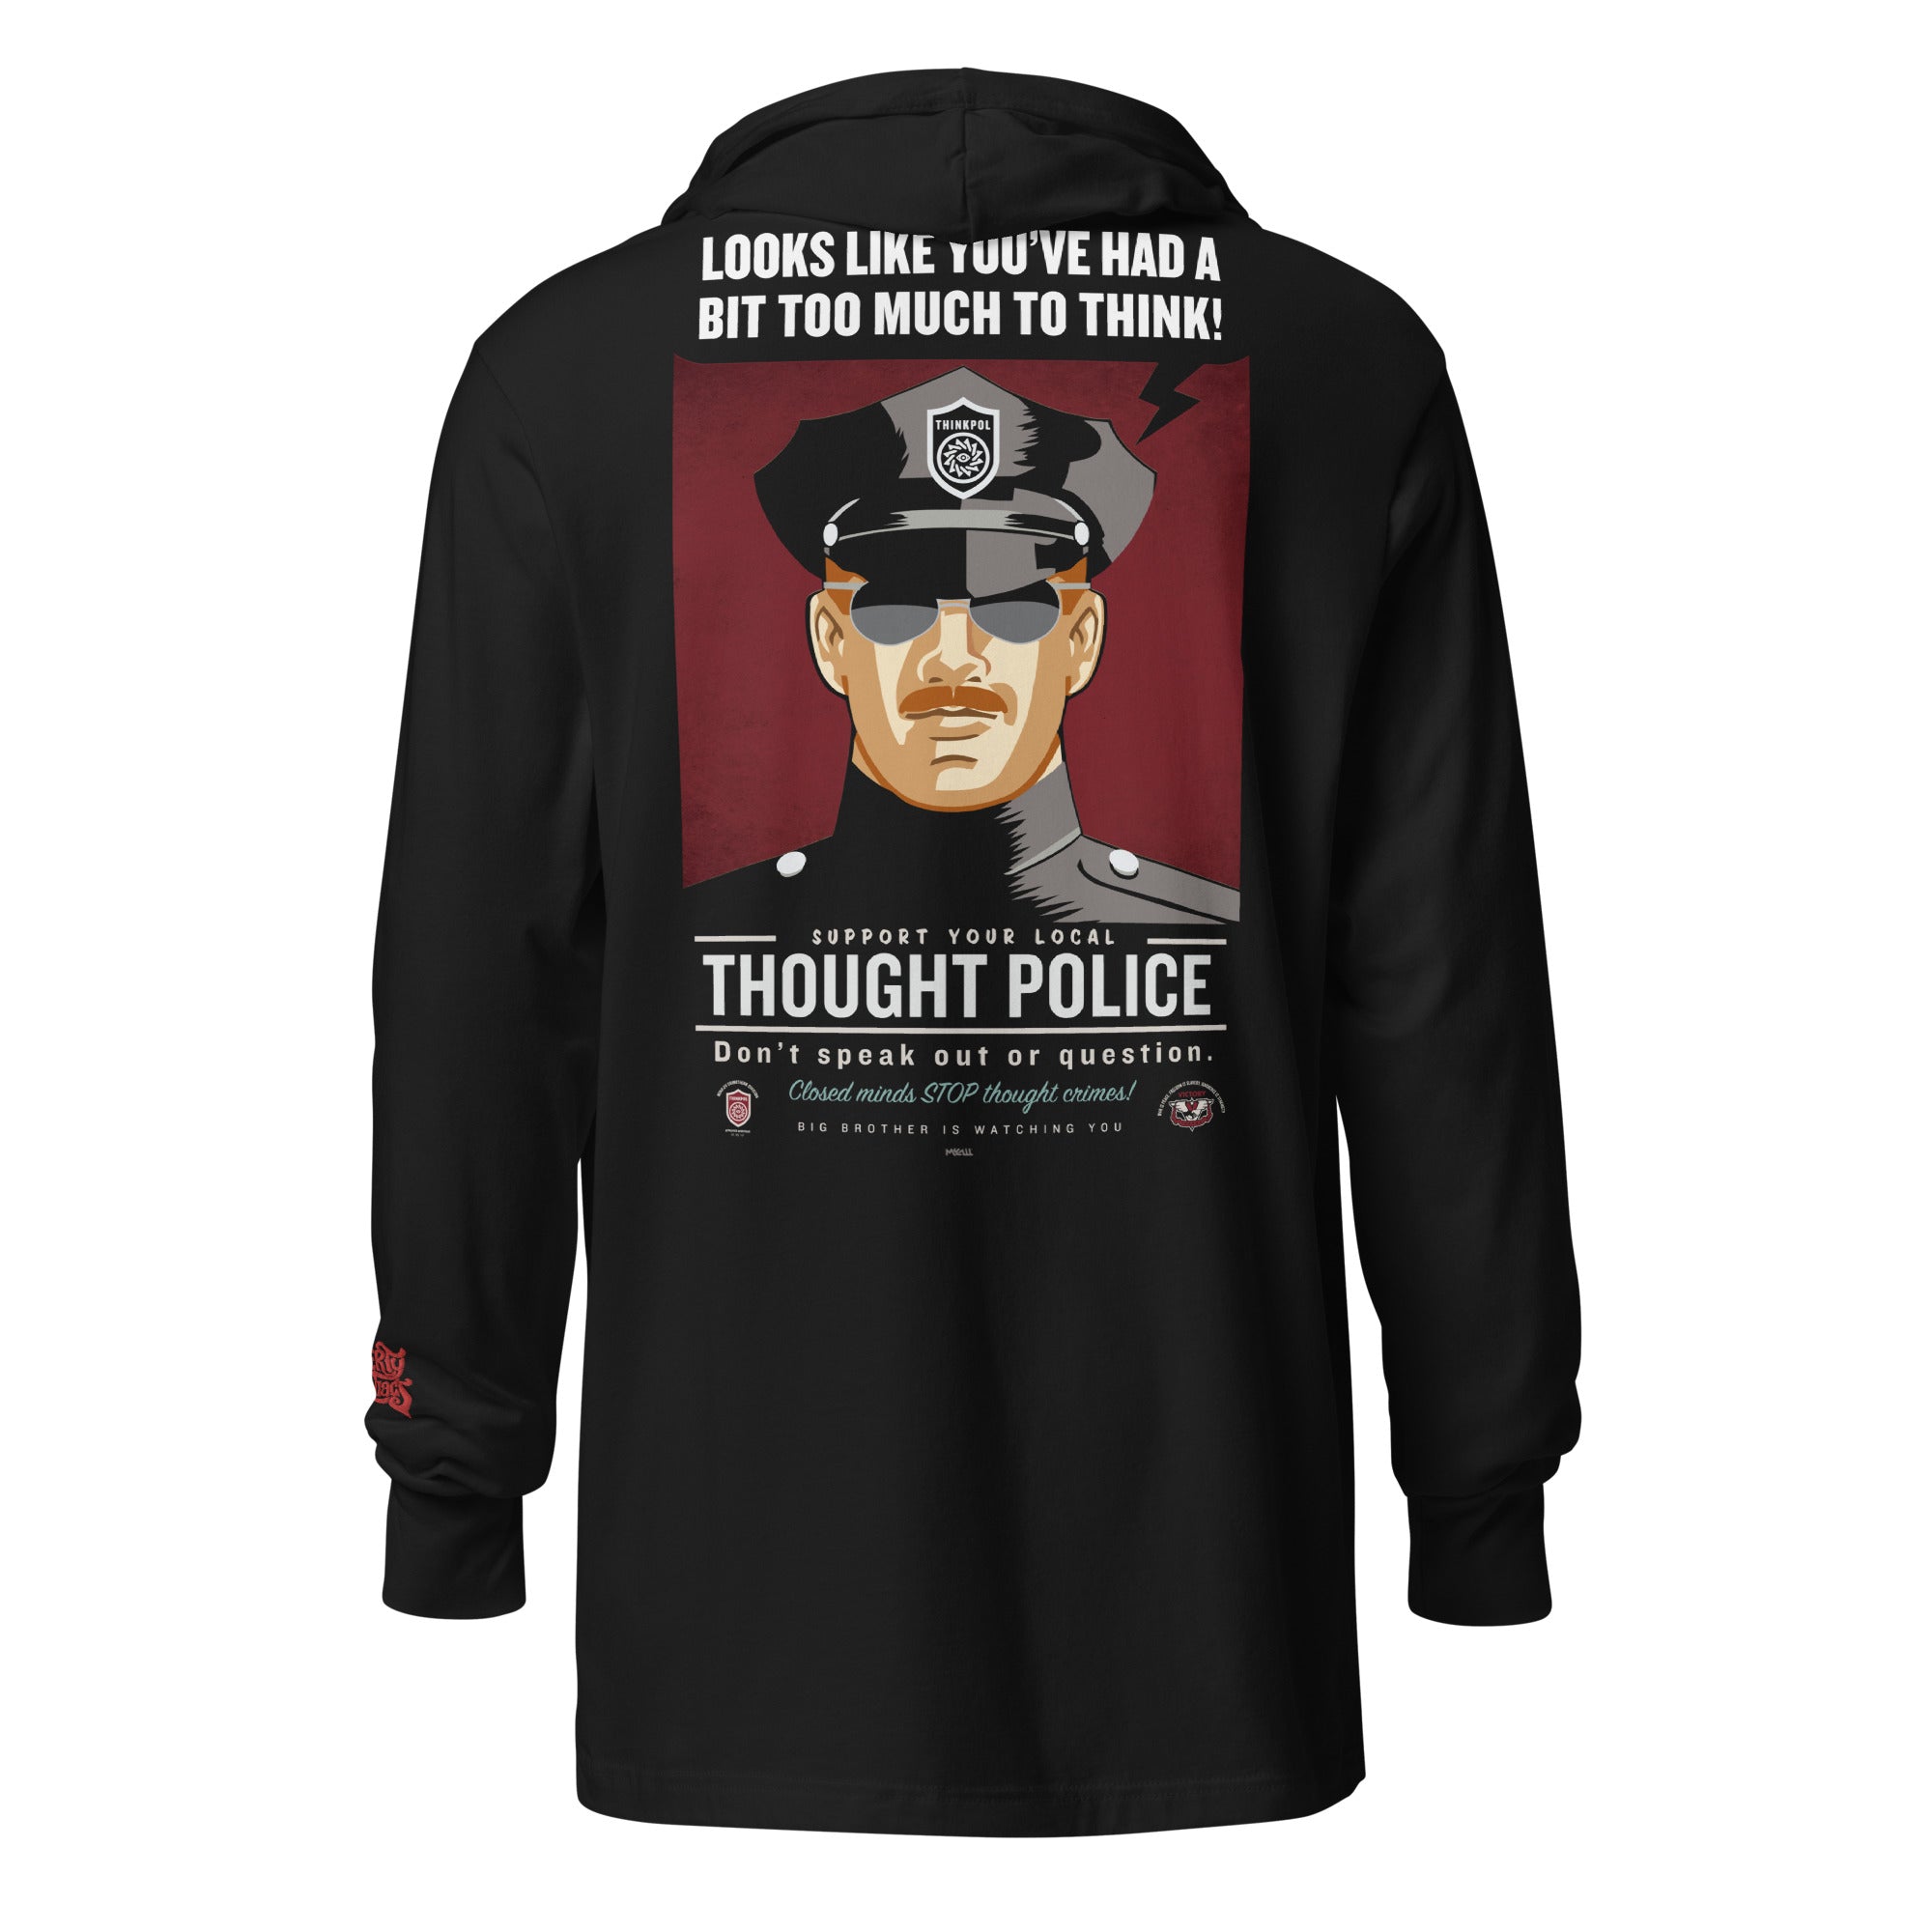 Looks Like You've Had A Bit Too Much To Think Thought Police Hooded Long-Sleeve Tee